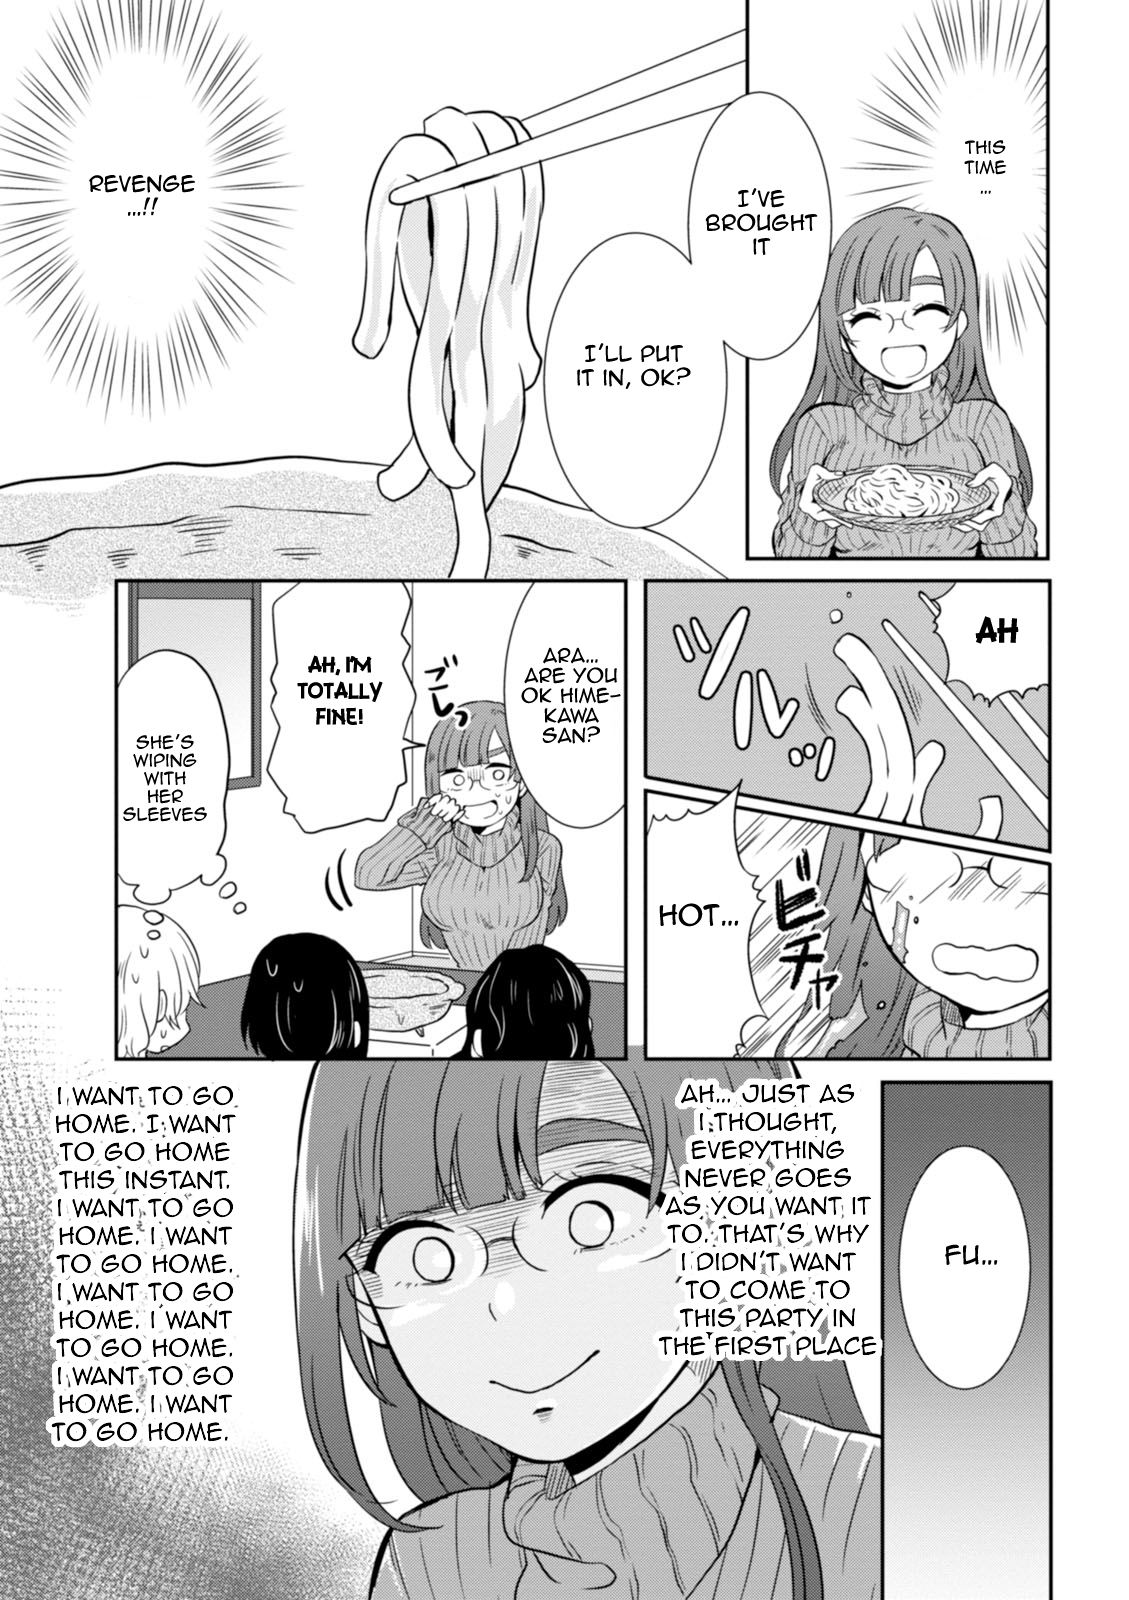 Hime no Dameshi Vol. 3 Ch. 22 Hime And Nabe Party